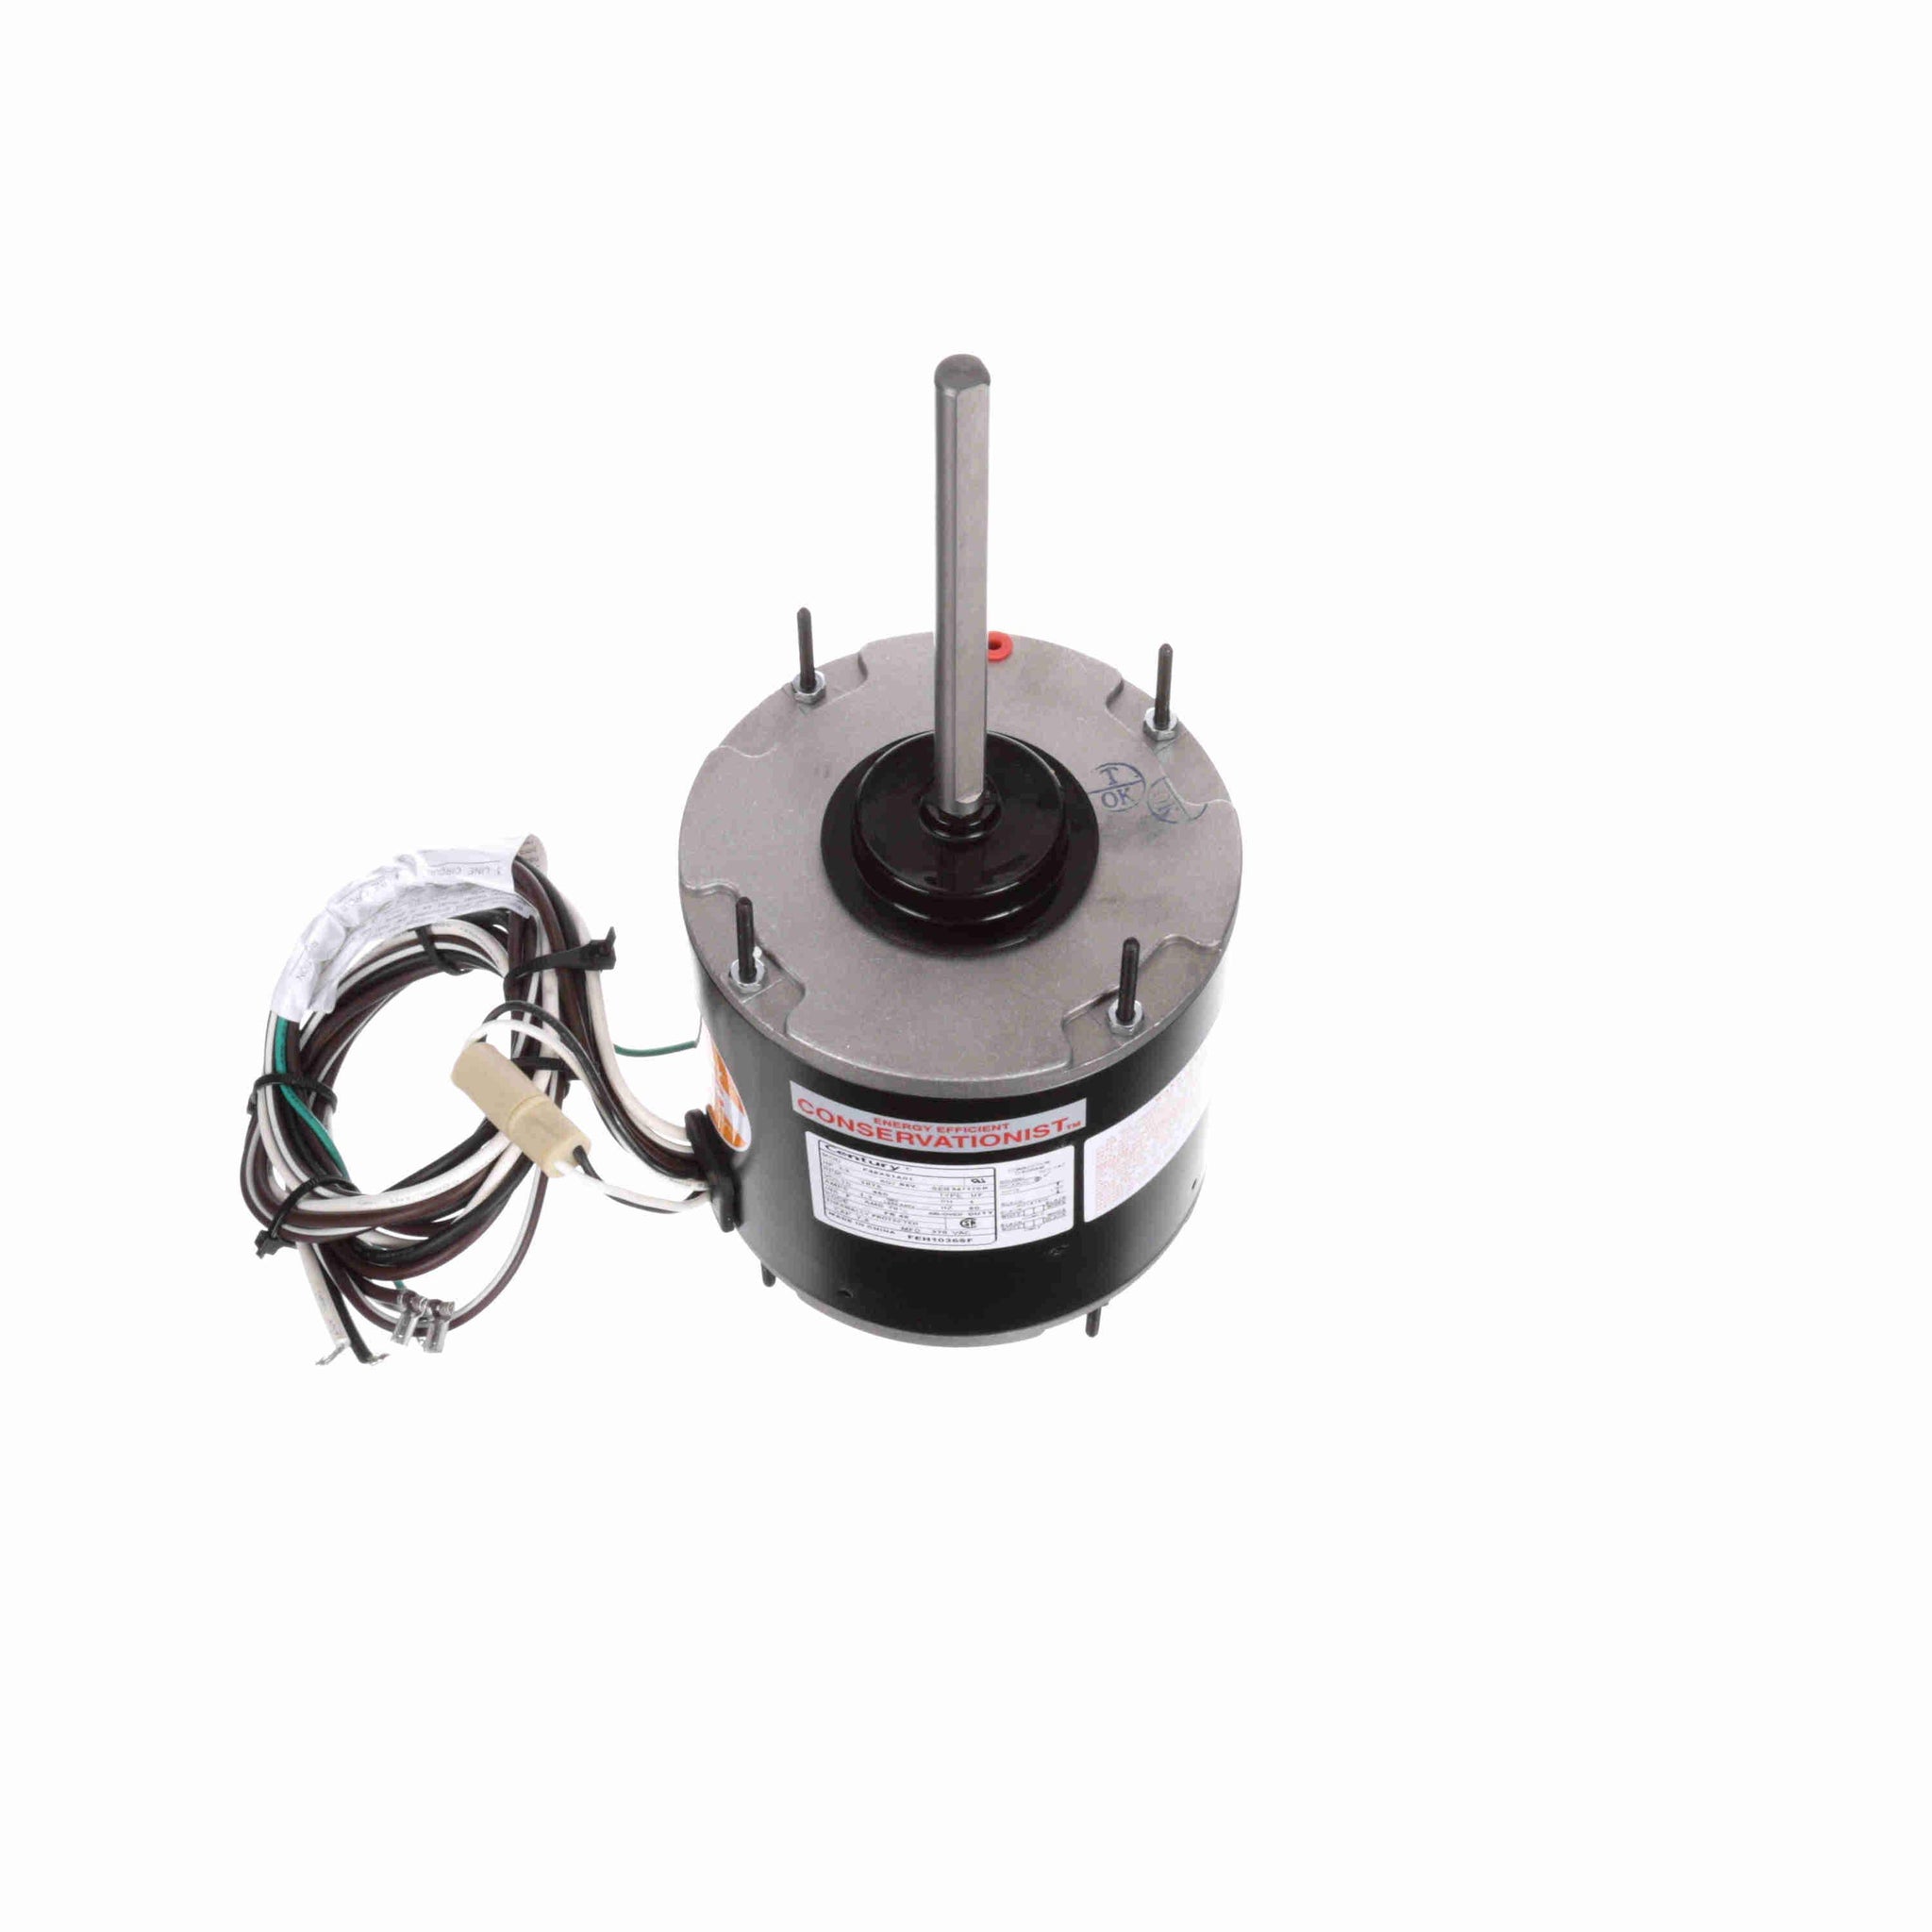 FEH1036SF - 1/3 HP Condenser Fan Motor, 1075 RPM, 460 Volts, 48 Frame, TEAO - Hardware & Moreee